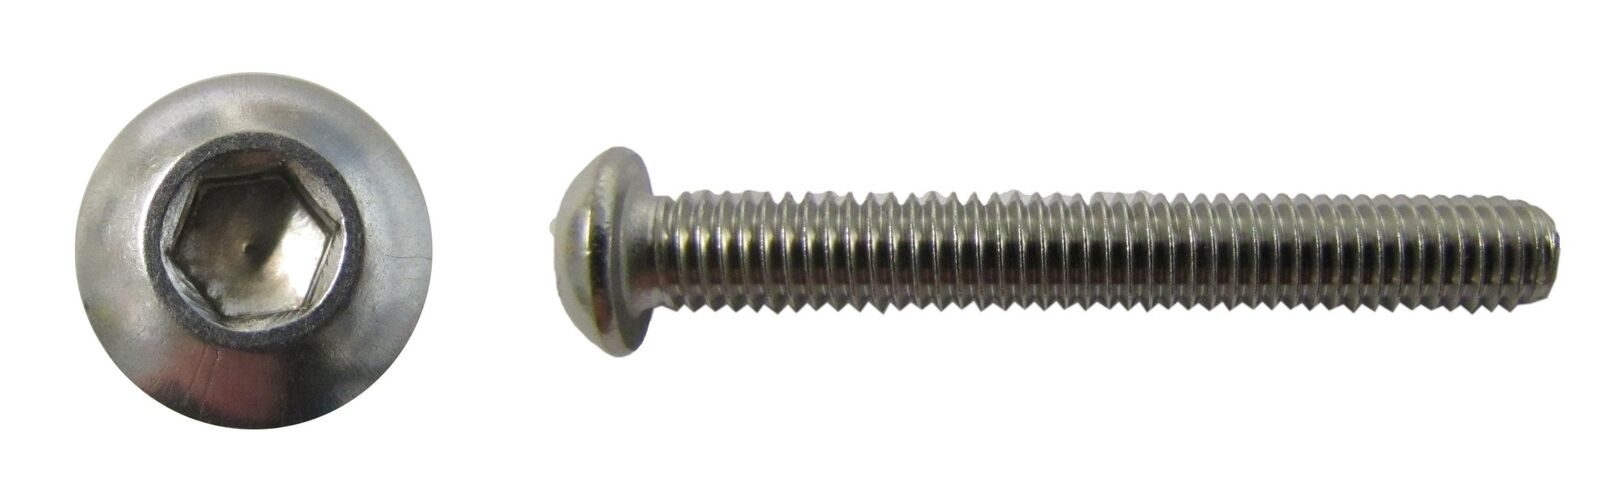 Screws Button Allen Max 51% OFF Stainless Steel 6mm x 25mm Fort Worth Mall 1.00mm Pitch Pe